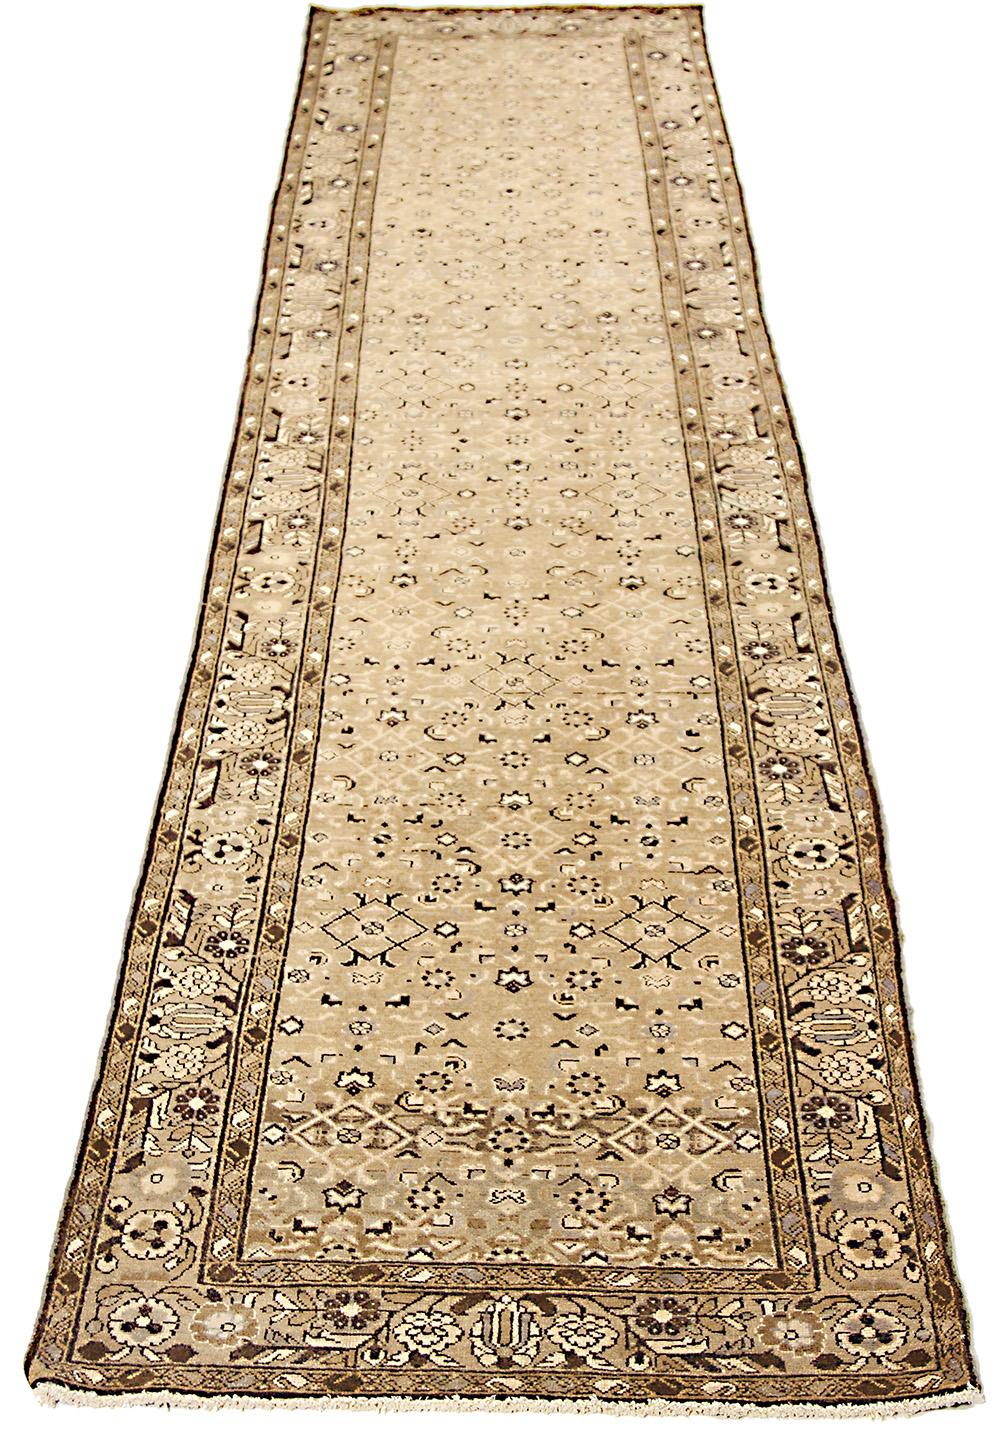 Antique Persian runner rug handwoven from the finest sheep’s wool and colored with all-natural vegetable dyes that are safe for humans and pets. It’s a traditional Malayer design featuring black and white botanical patterns over a light brown field.